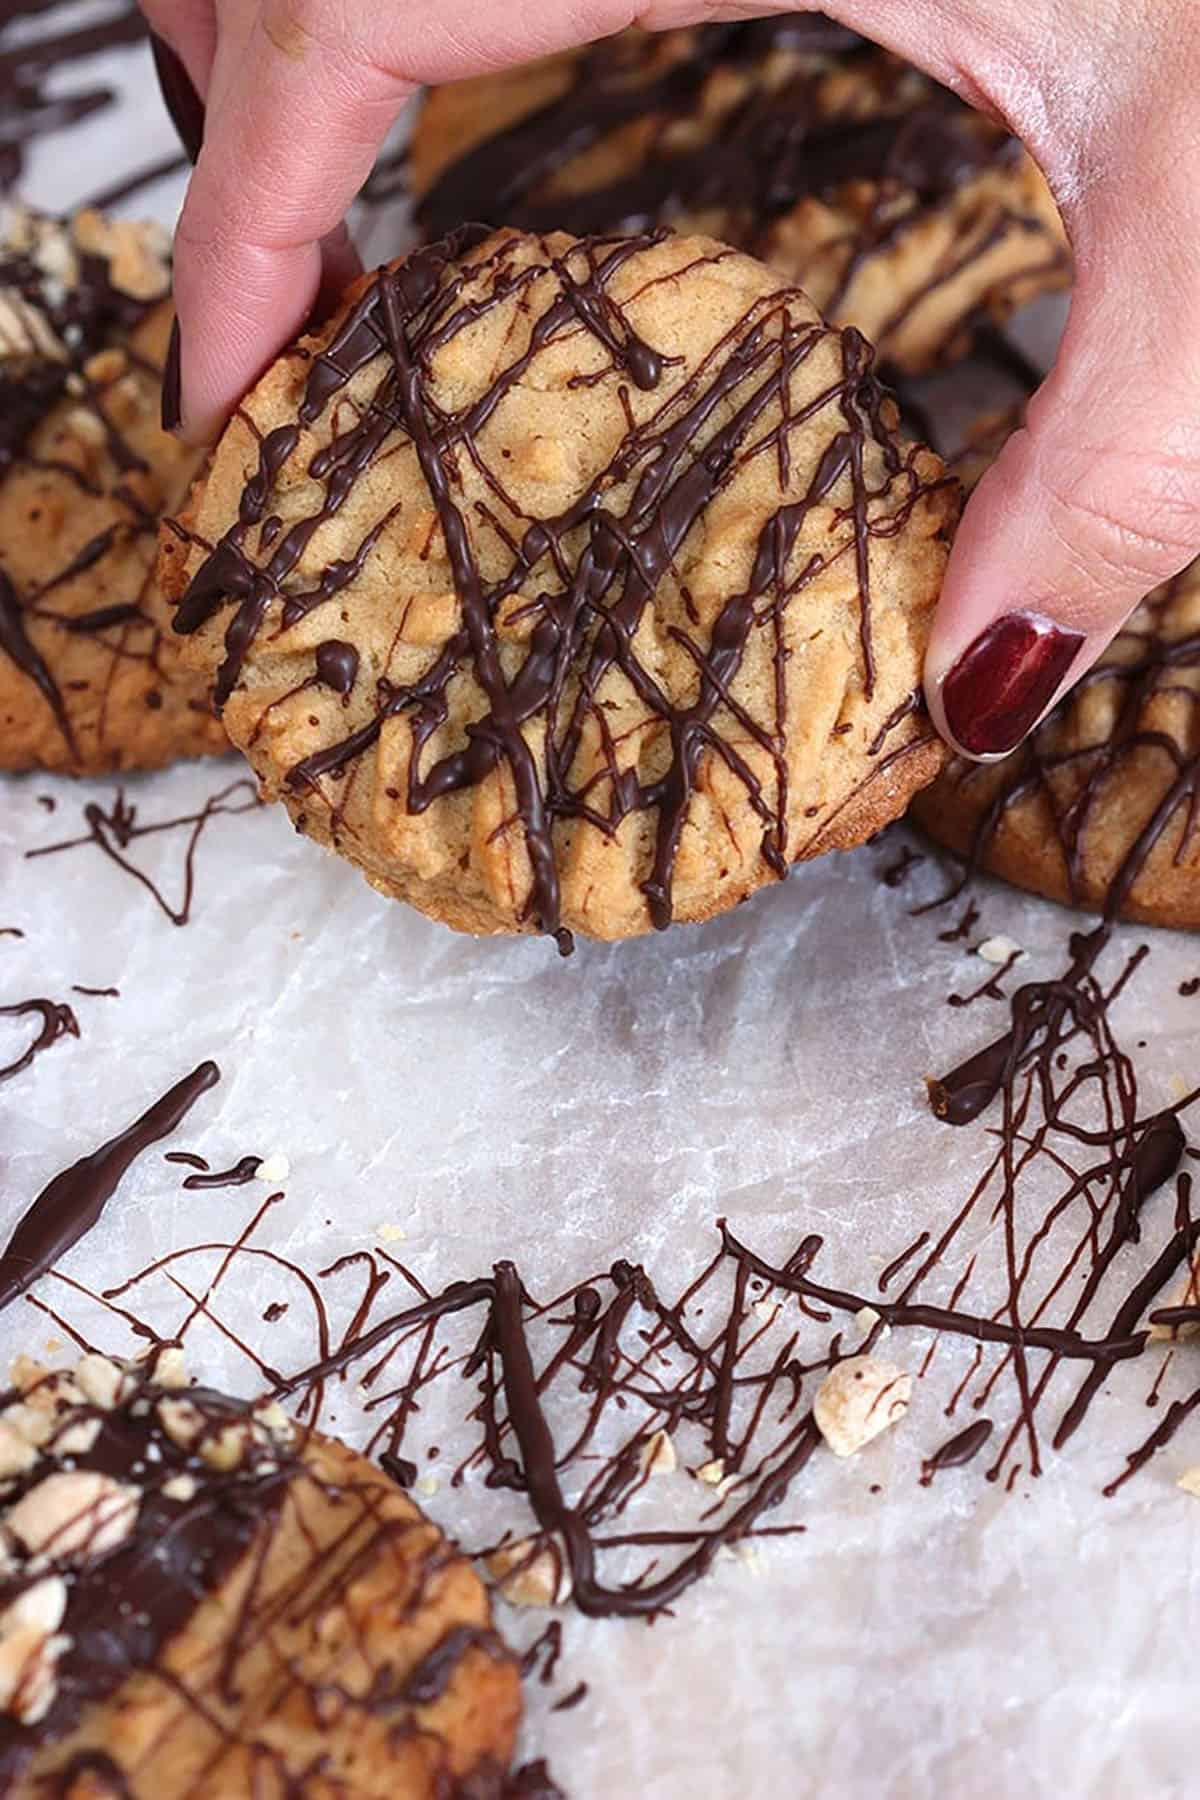 Peanut butter cookie drizzled with chocolate being lifted from a sheet of parchment paper